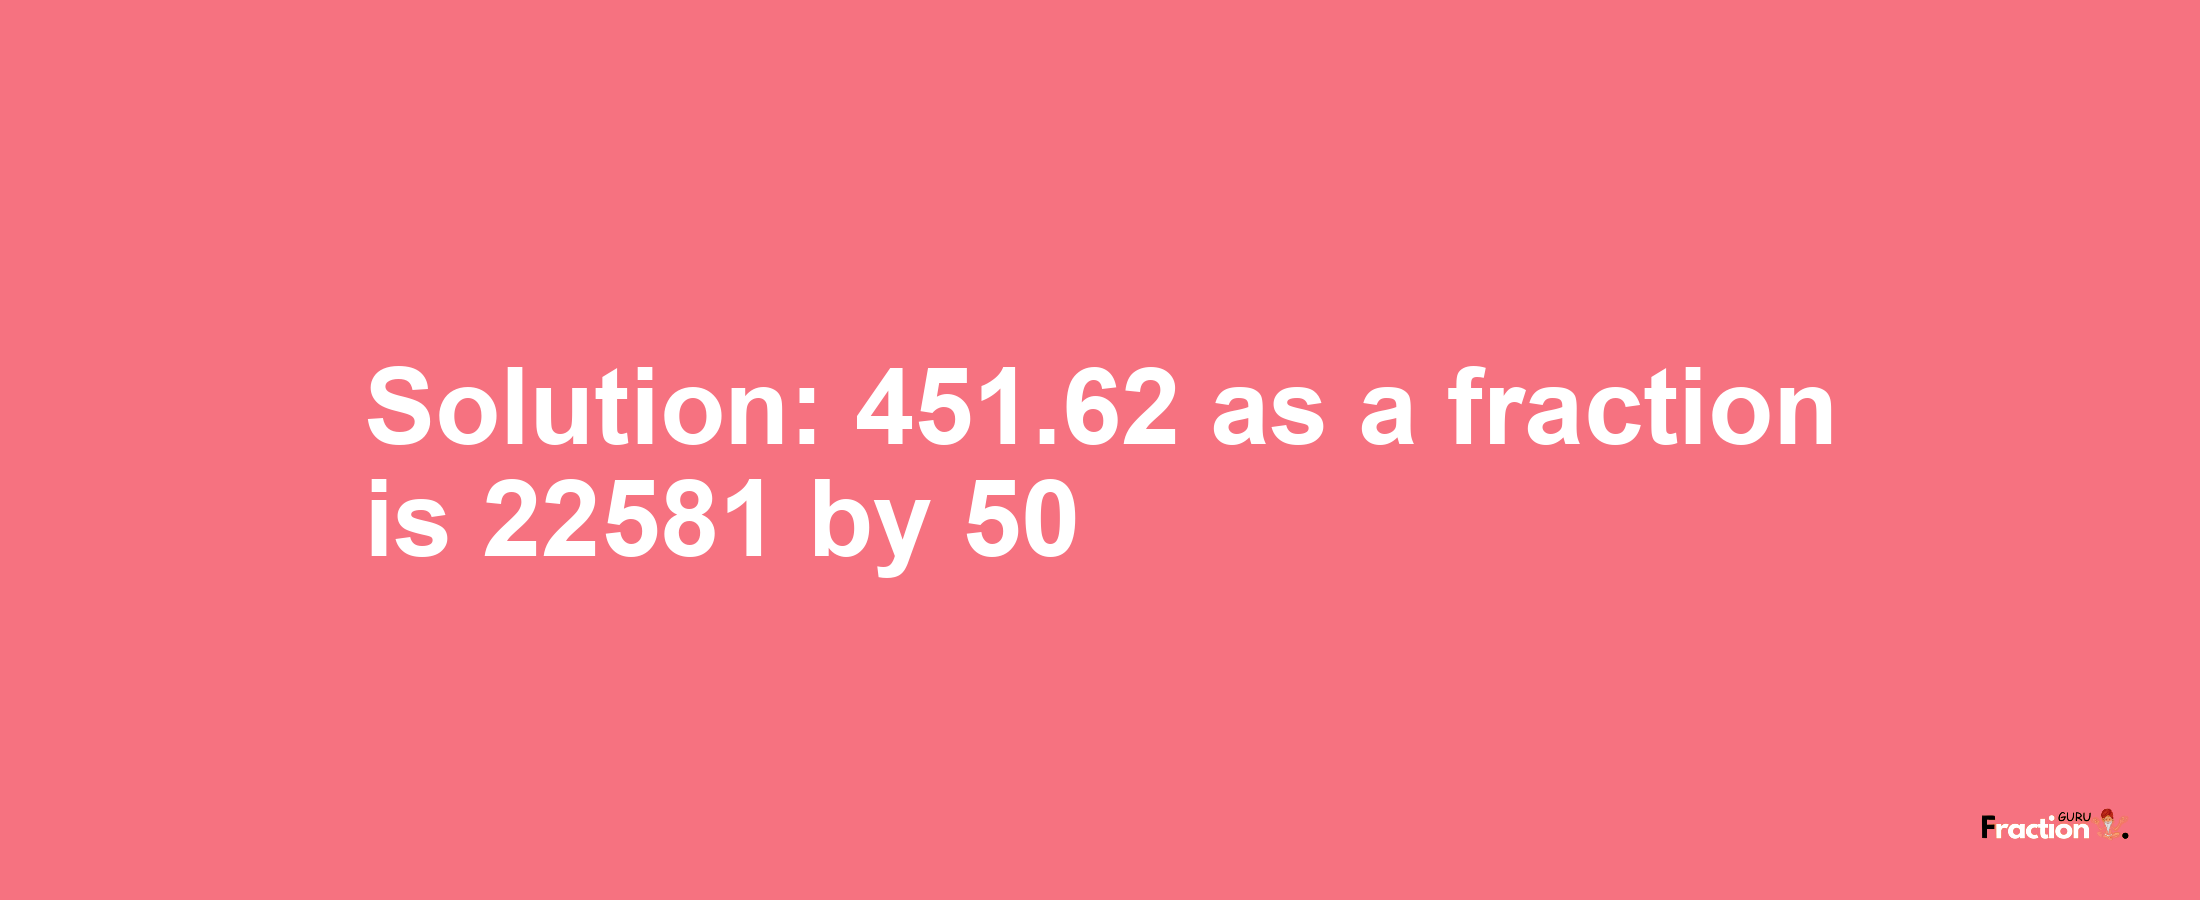 Solution:451.62 as a fraction is 22581/50